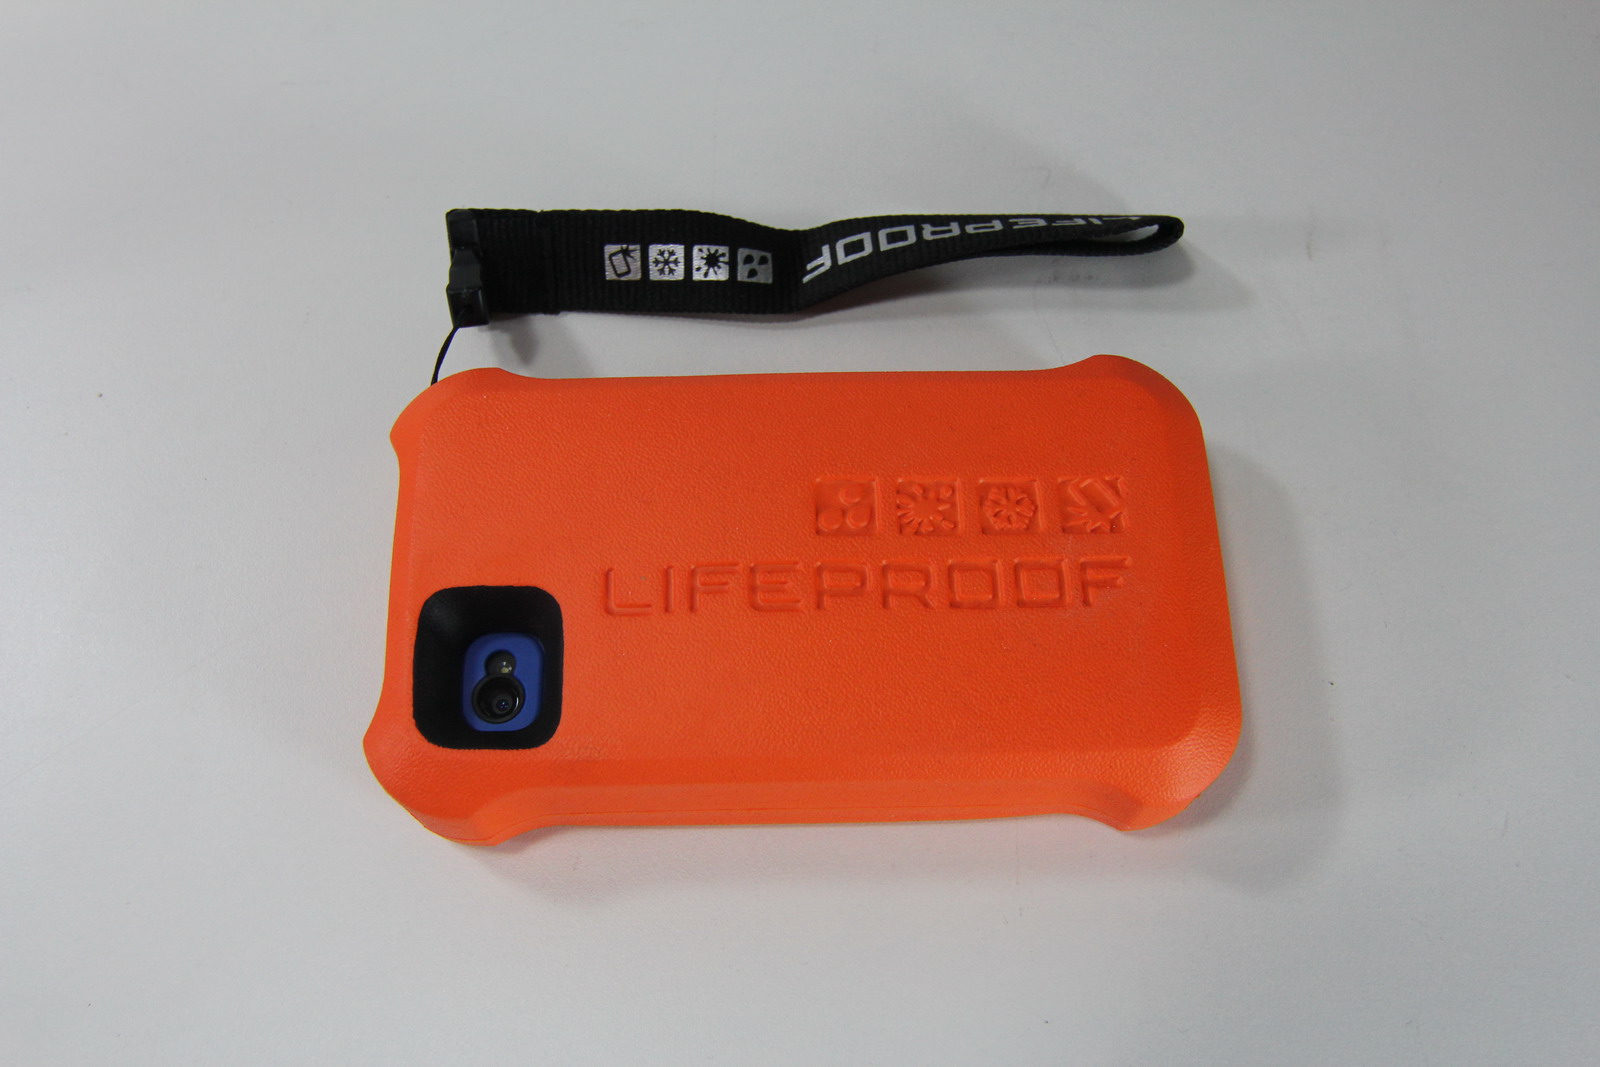 Max Sled Product Review - Lifeproof Your iPhone With a 